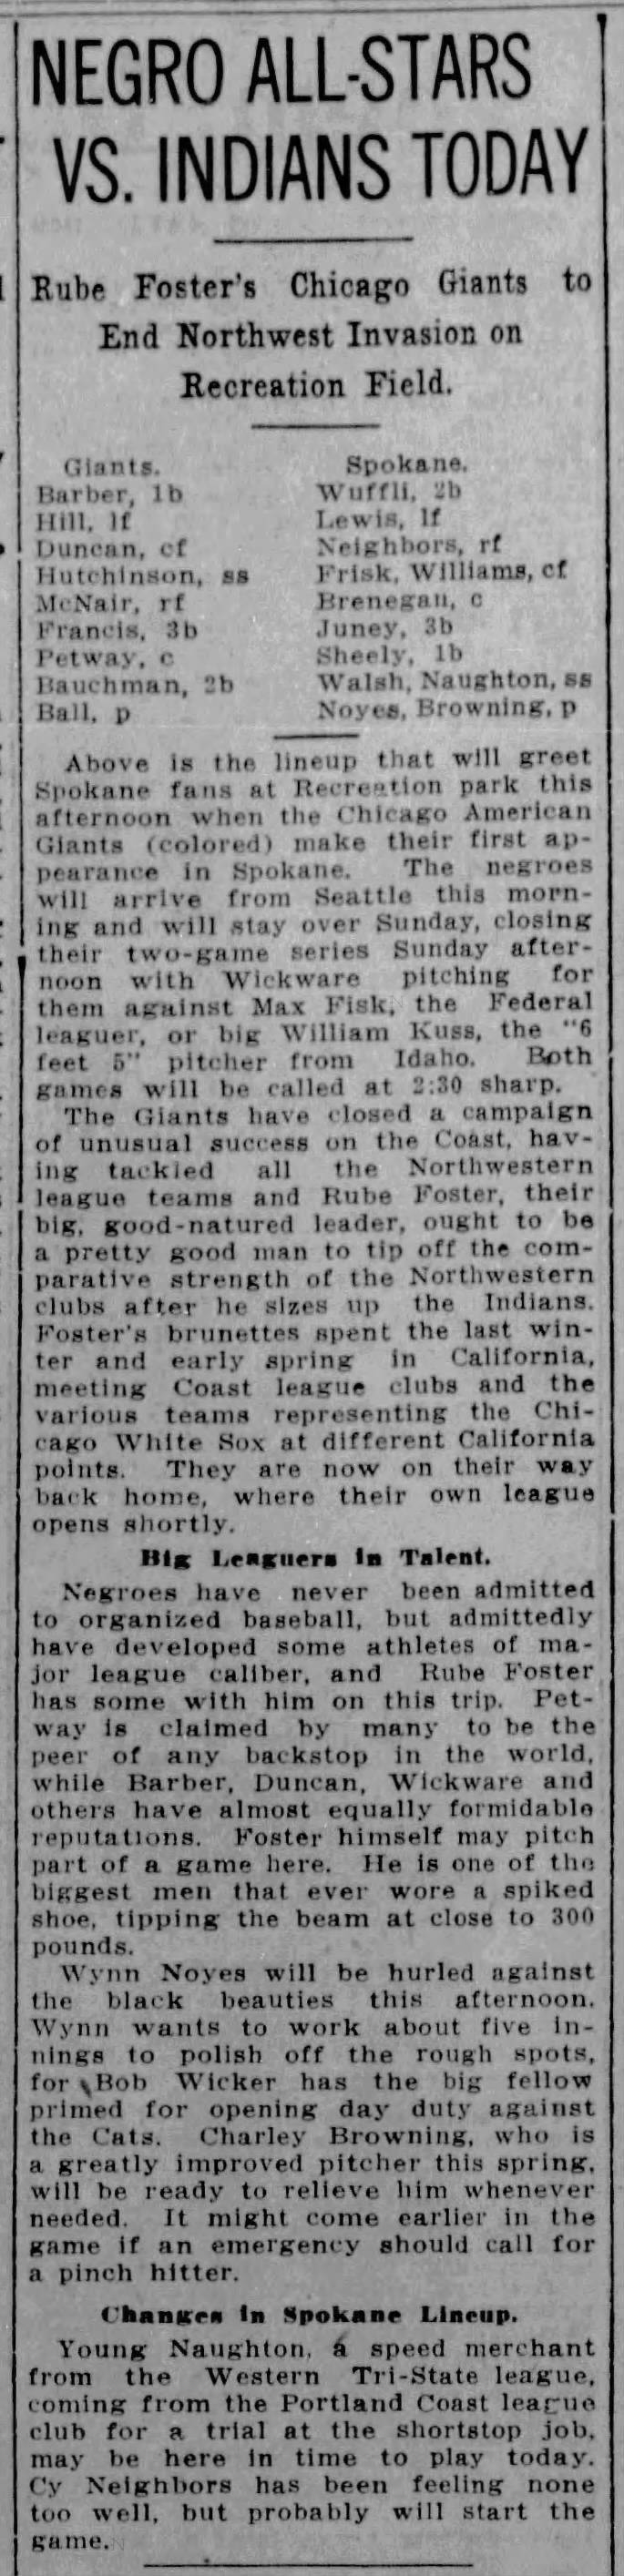 Rube Foster's Chicago American Giants set to play game in Spokane, WA, in April 1915